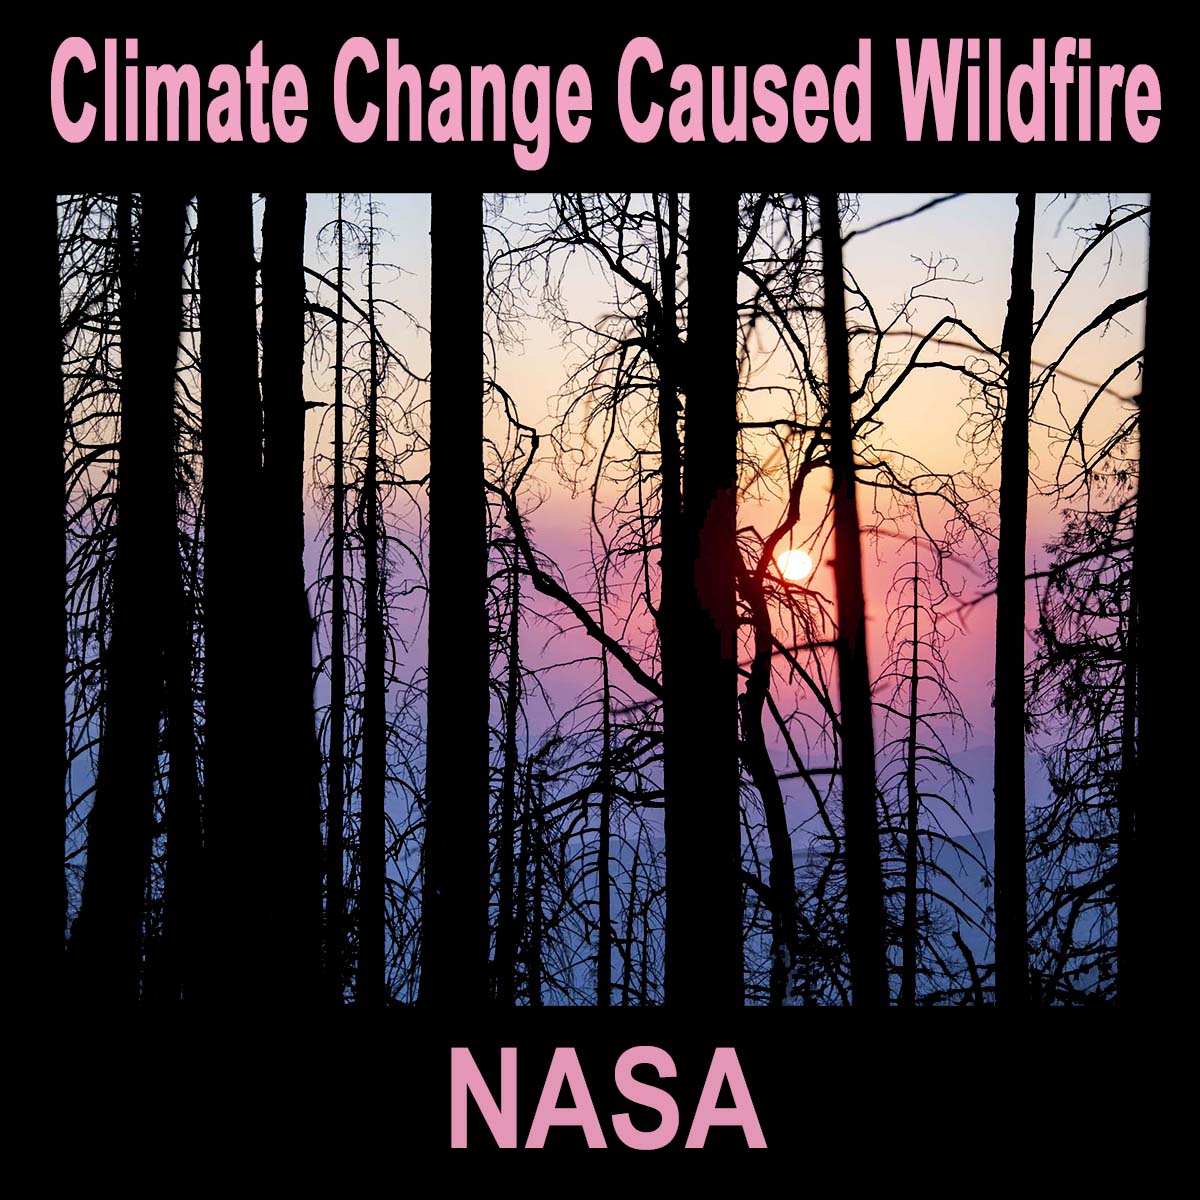 Increasing Wildfire Caused by Climate Change – NASA Uses Professional Judgement